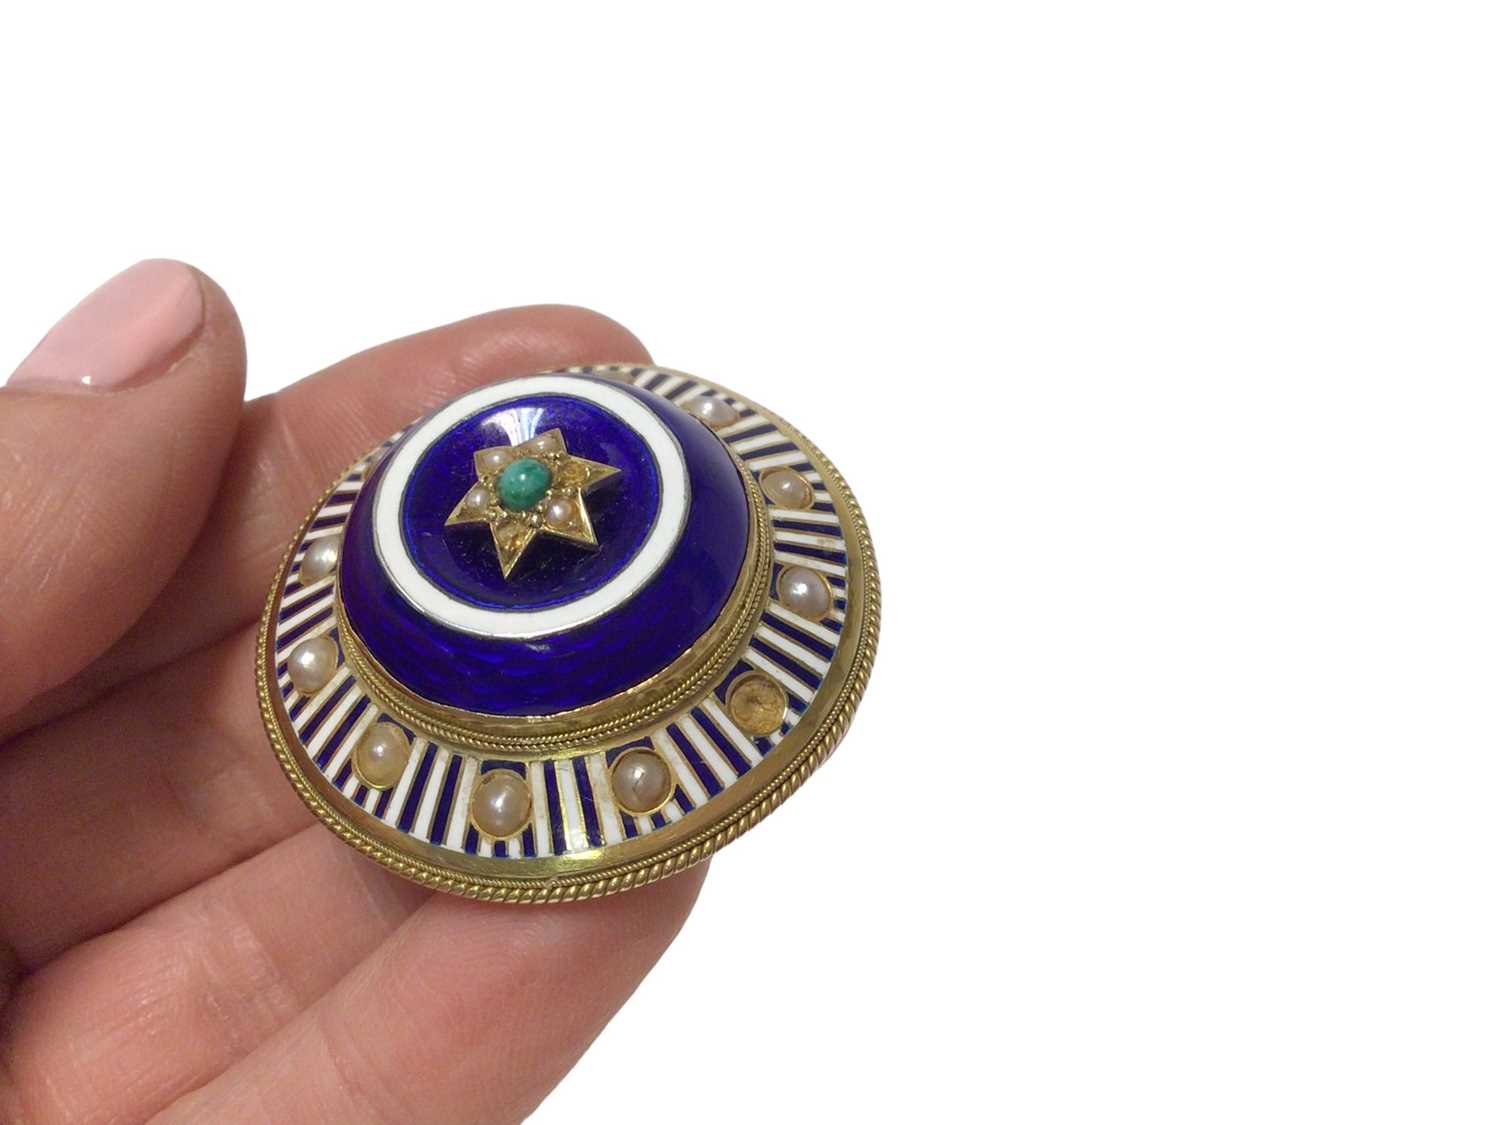 Victorian gold and enamel circular target brooch - Image 3 of 4